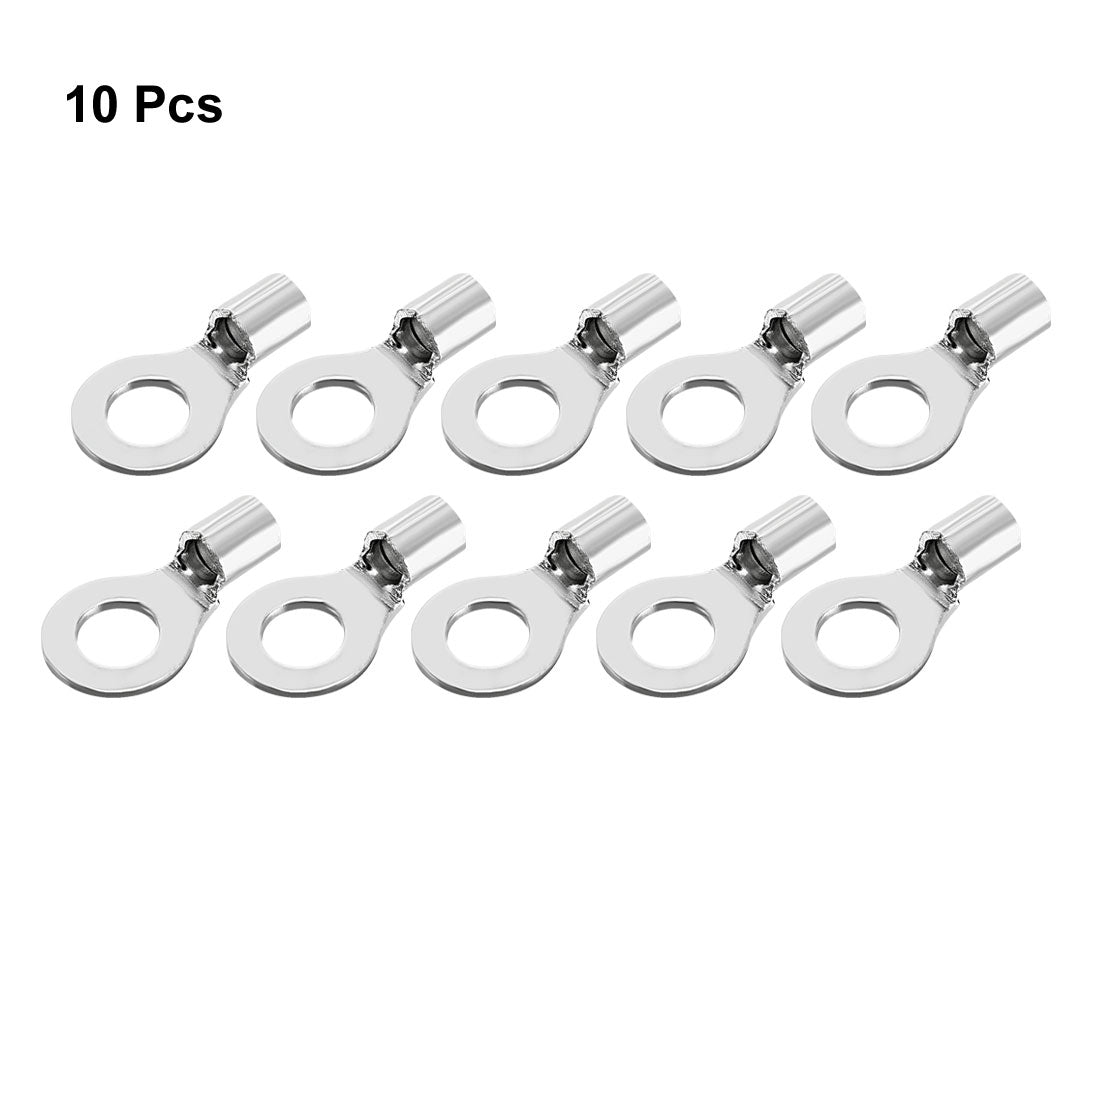 uxcell Uxcell 10Pcs RNB5.5-6 Non-Insulated U-Type Copper Crimp Terminals 4-6mm2 Wire Connector Silver Tone